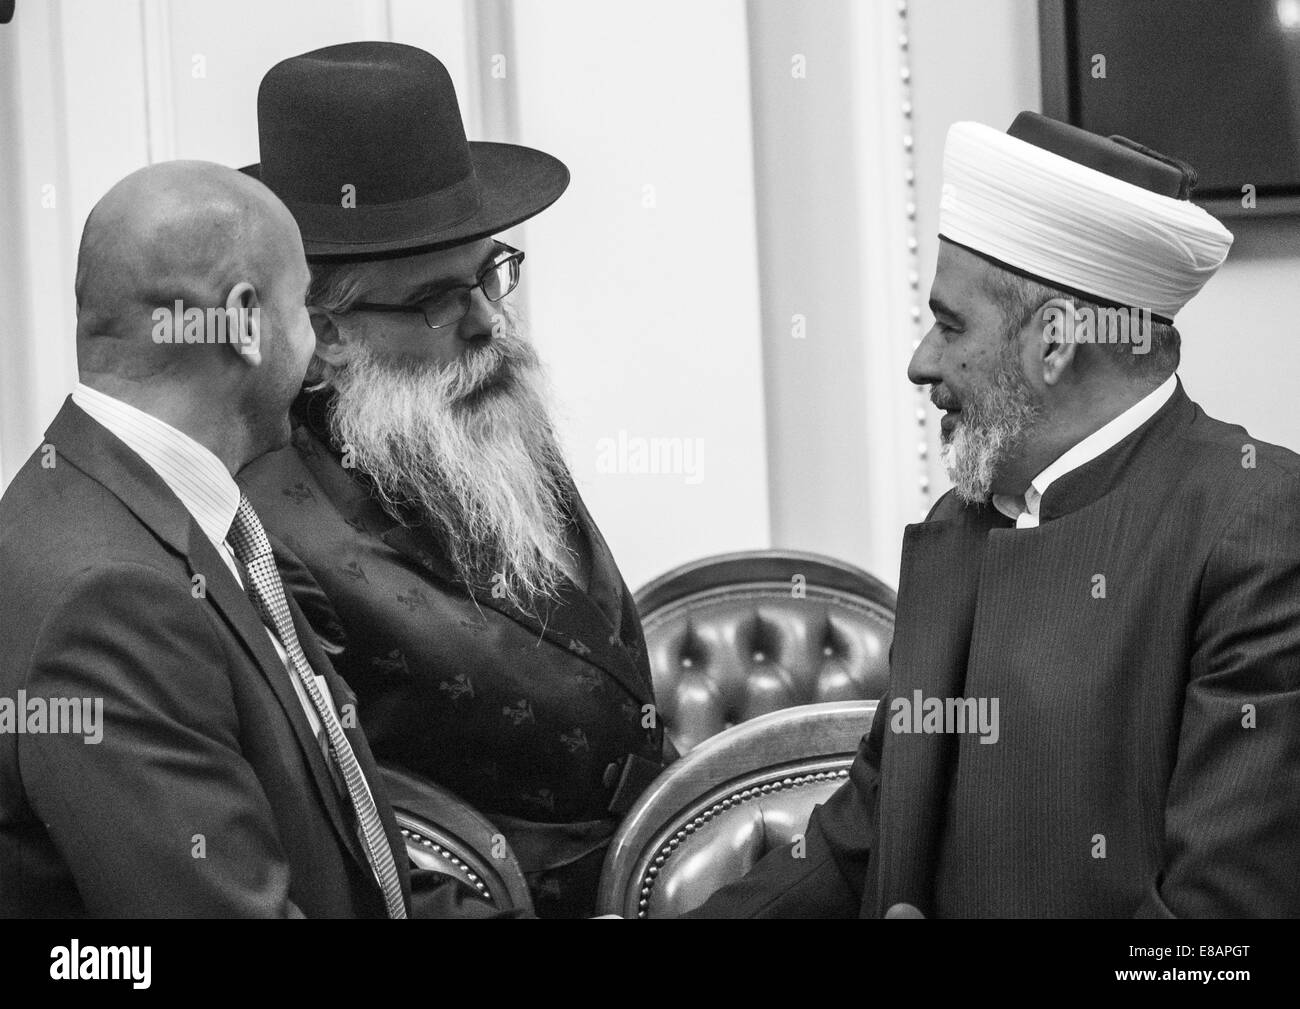 Oct. 3, 2014 - Chief Rabbi of Kiev and Ukraine Yaakov Dov Bleich and Grand Mufti of Ukraine Sheikh Ahmad Tamim -- Prime Minister of Ukraine Arseniy Yatsenyuk and Chairman of the Verkhovna Rada of Ukraine Oleksandr Turchynov met with members of the All-Ukrainian Council of Churches and Religious Organizations.Alexander Turchin asked participants of the event to call worshipers to go for early parliamentary elections. Meanwhile assembled said about the threat of inter-religious conflict in Ukraine and asked to refrain from harsh statements and power grabs temples. In addition, representatives o Stock Photo